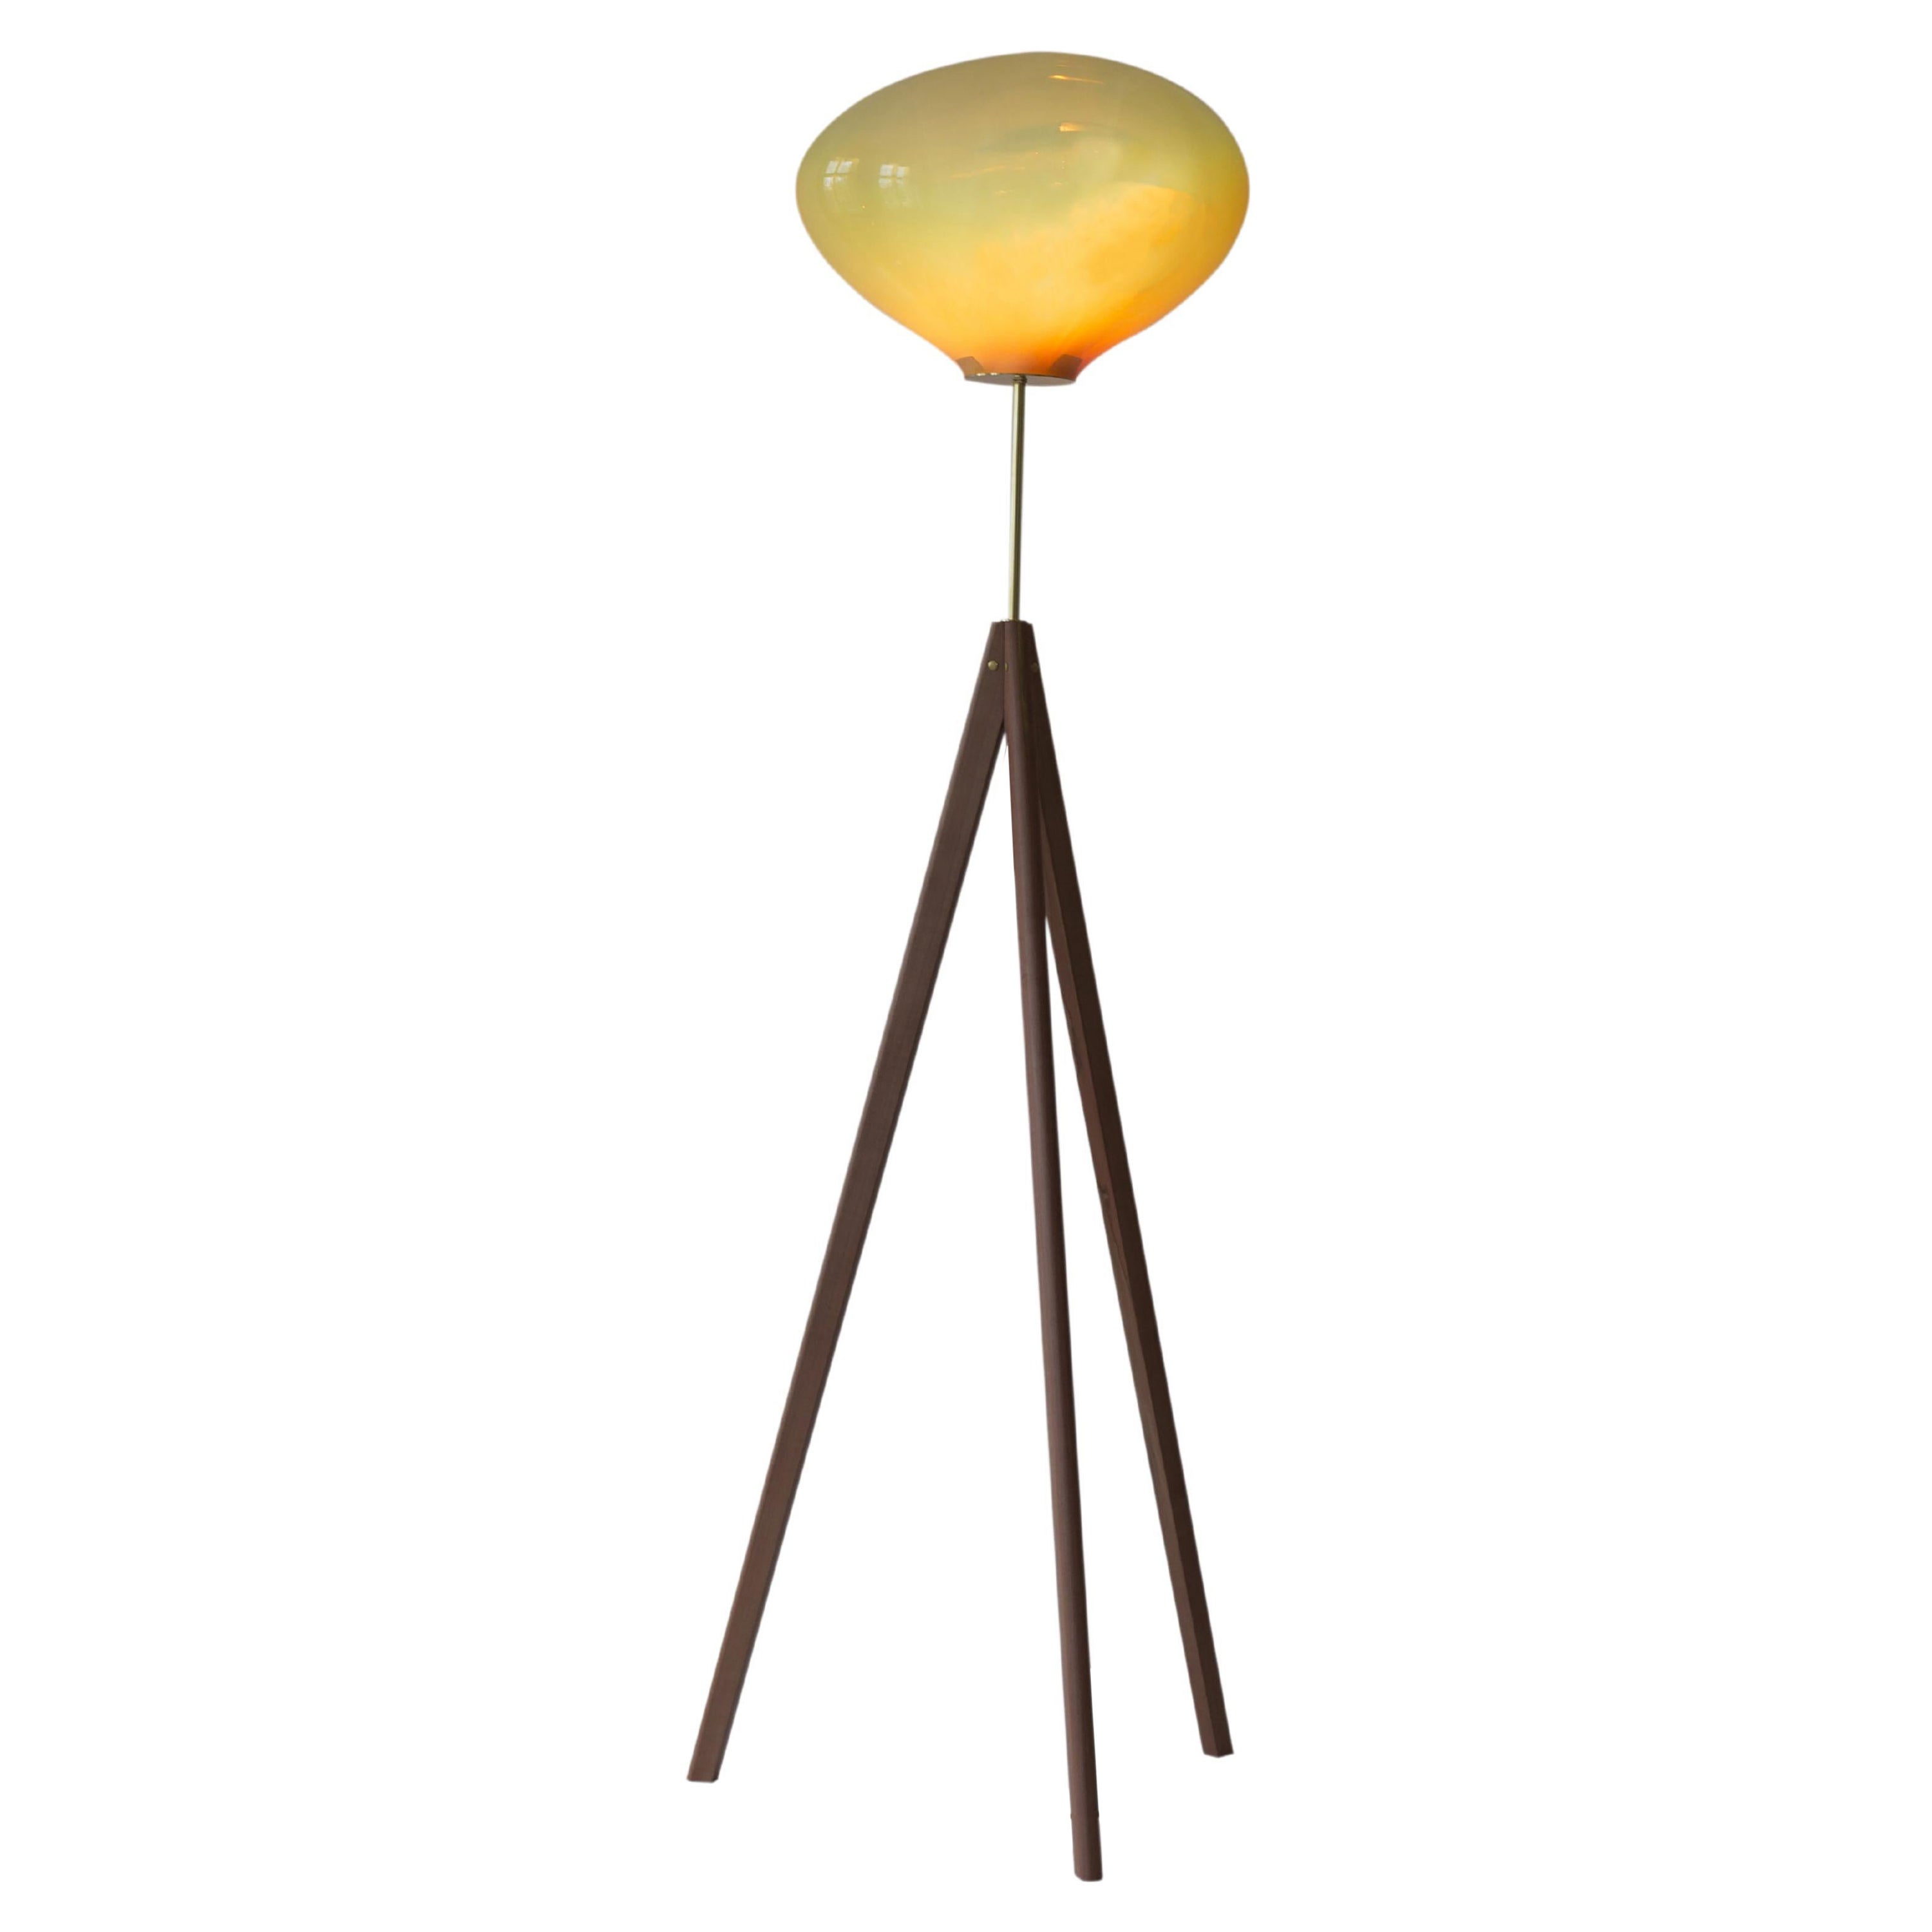 Stati X Amber Iridescent Floor Lamp by  ELOA For Sale